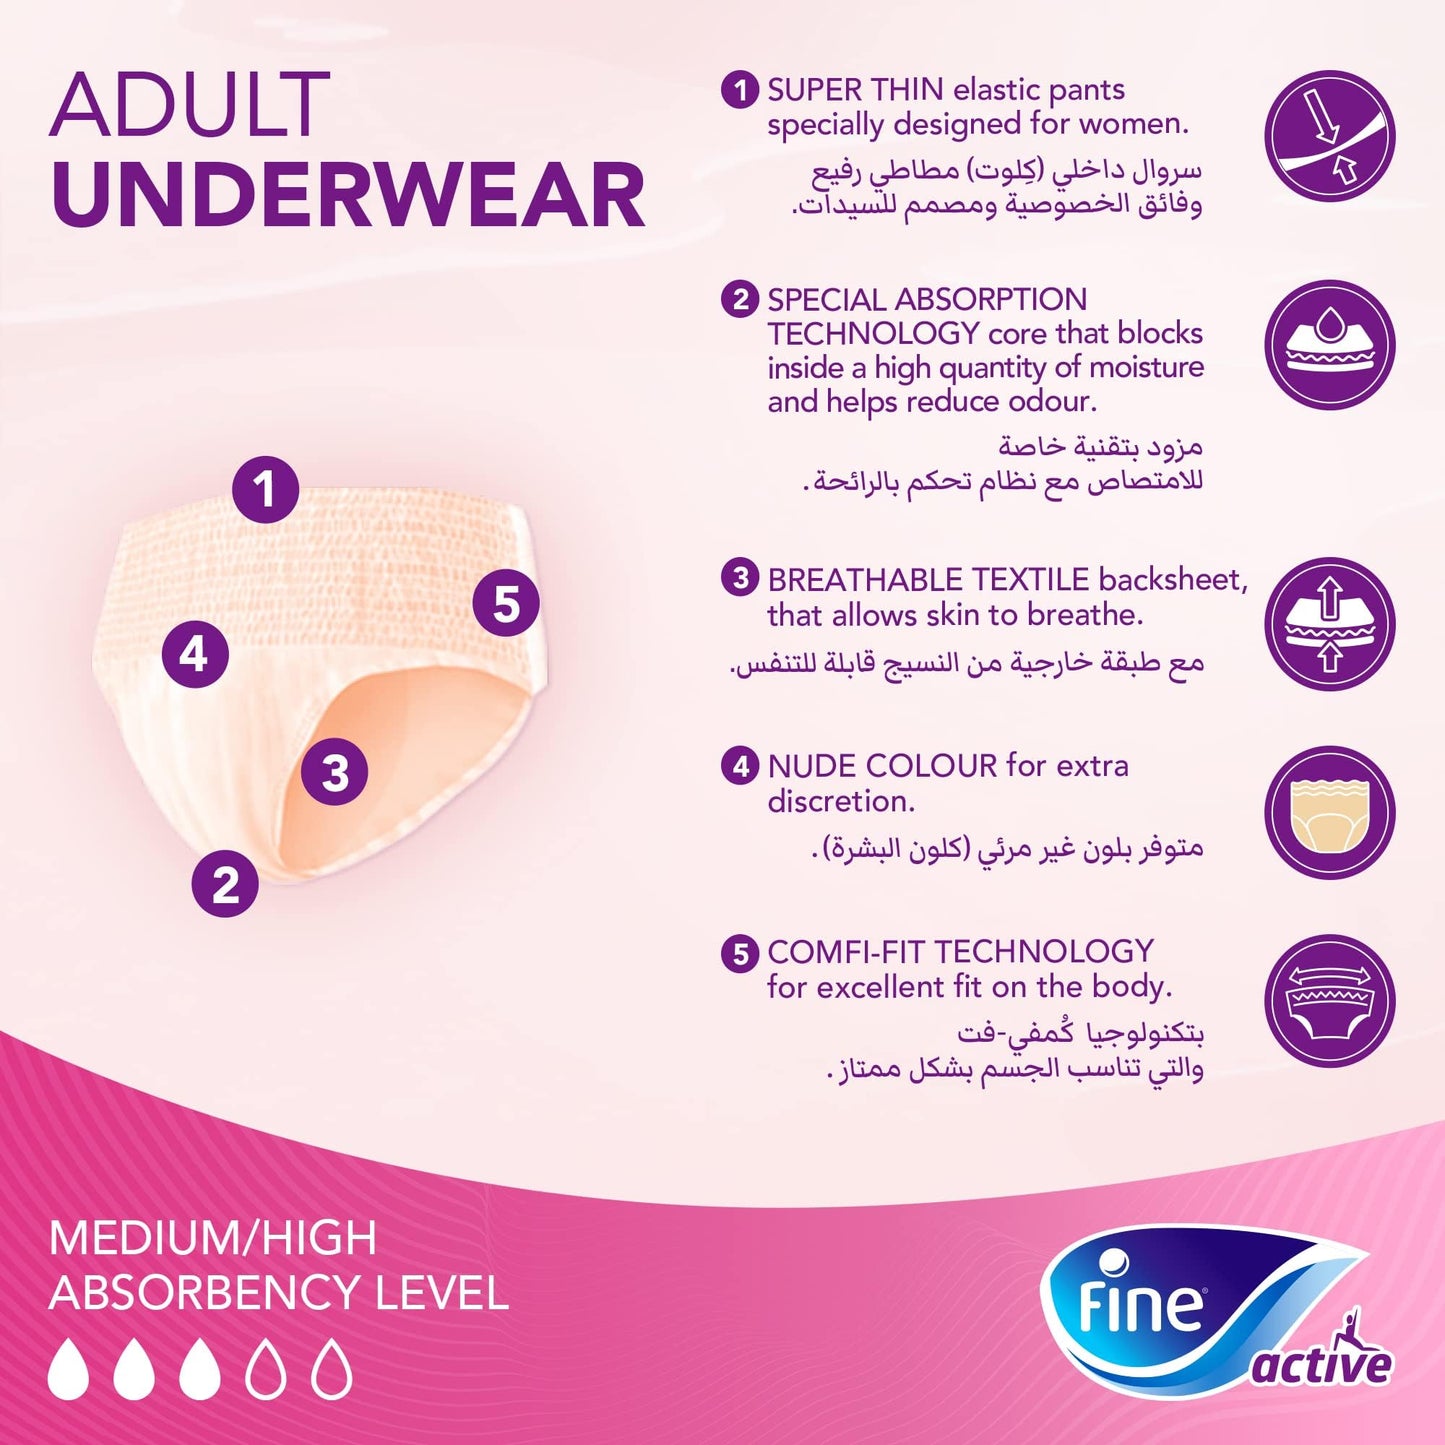 Fine Active Adult Incontinence and postpartum pull-up underwear for women, Size Large (Waist 100-140 cm), 12 count, super thin elastic pants, nude color for extra discretion, suitable for all ages